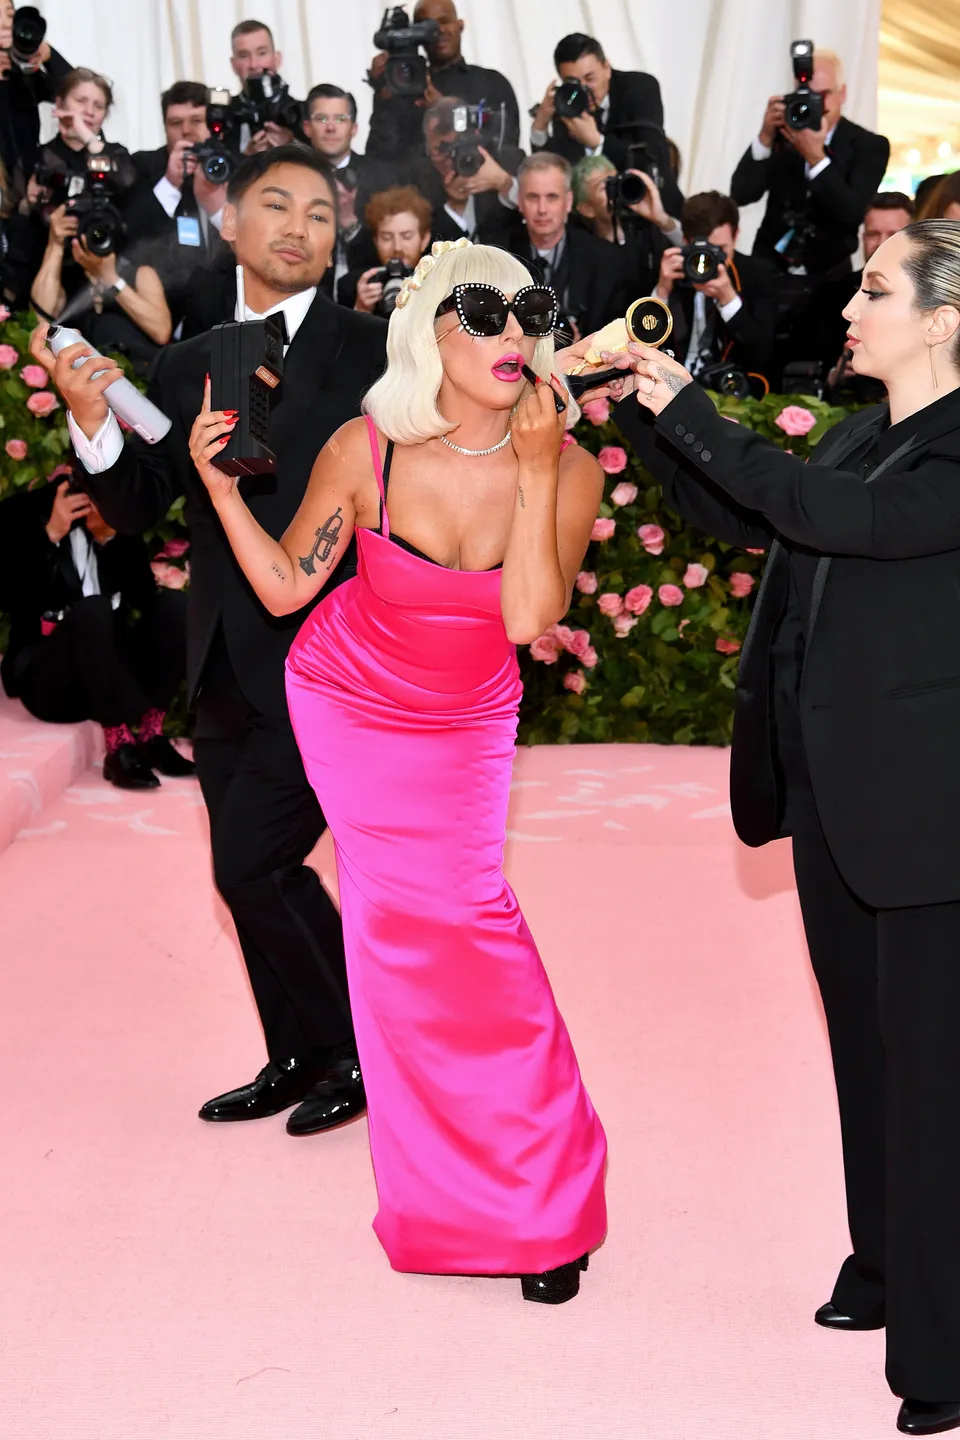 The Met Gala 2019: It May Not Have Been Camp, But It Was Fashion